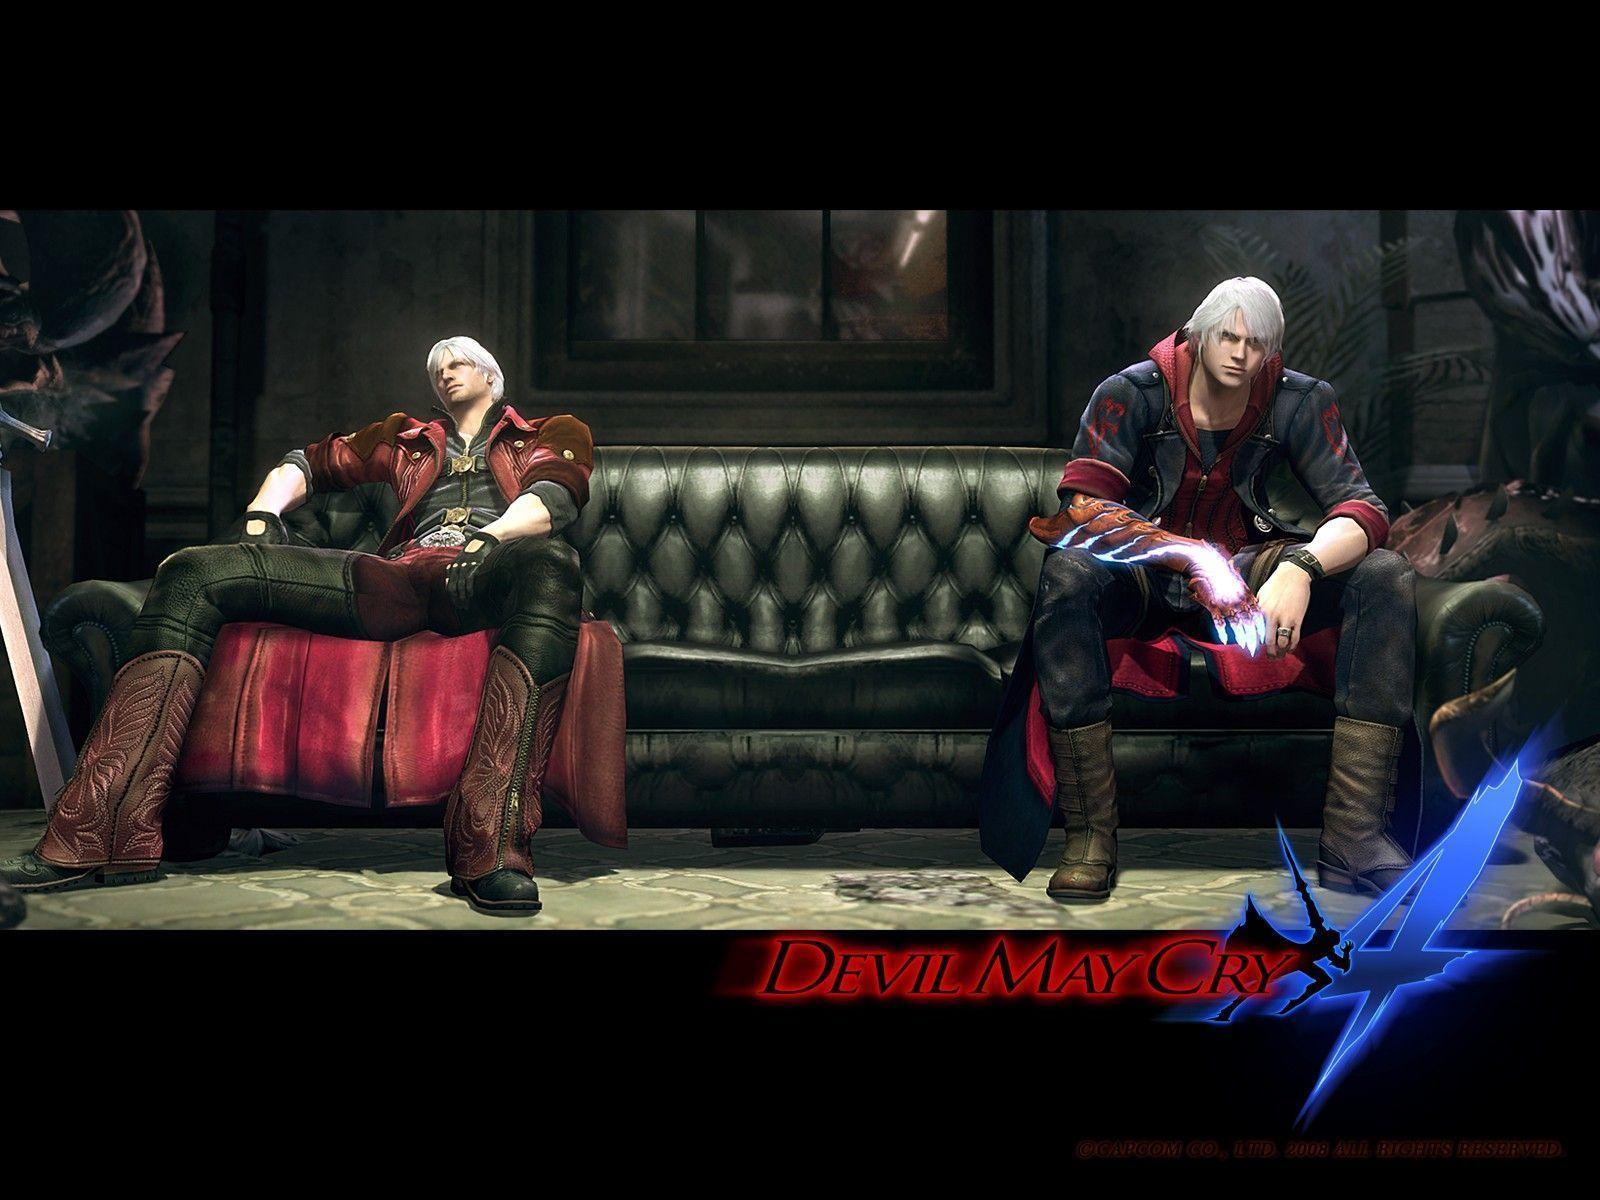 download free v devil may cry